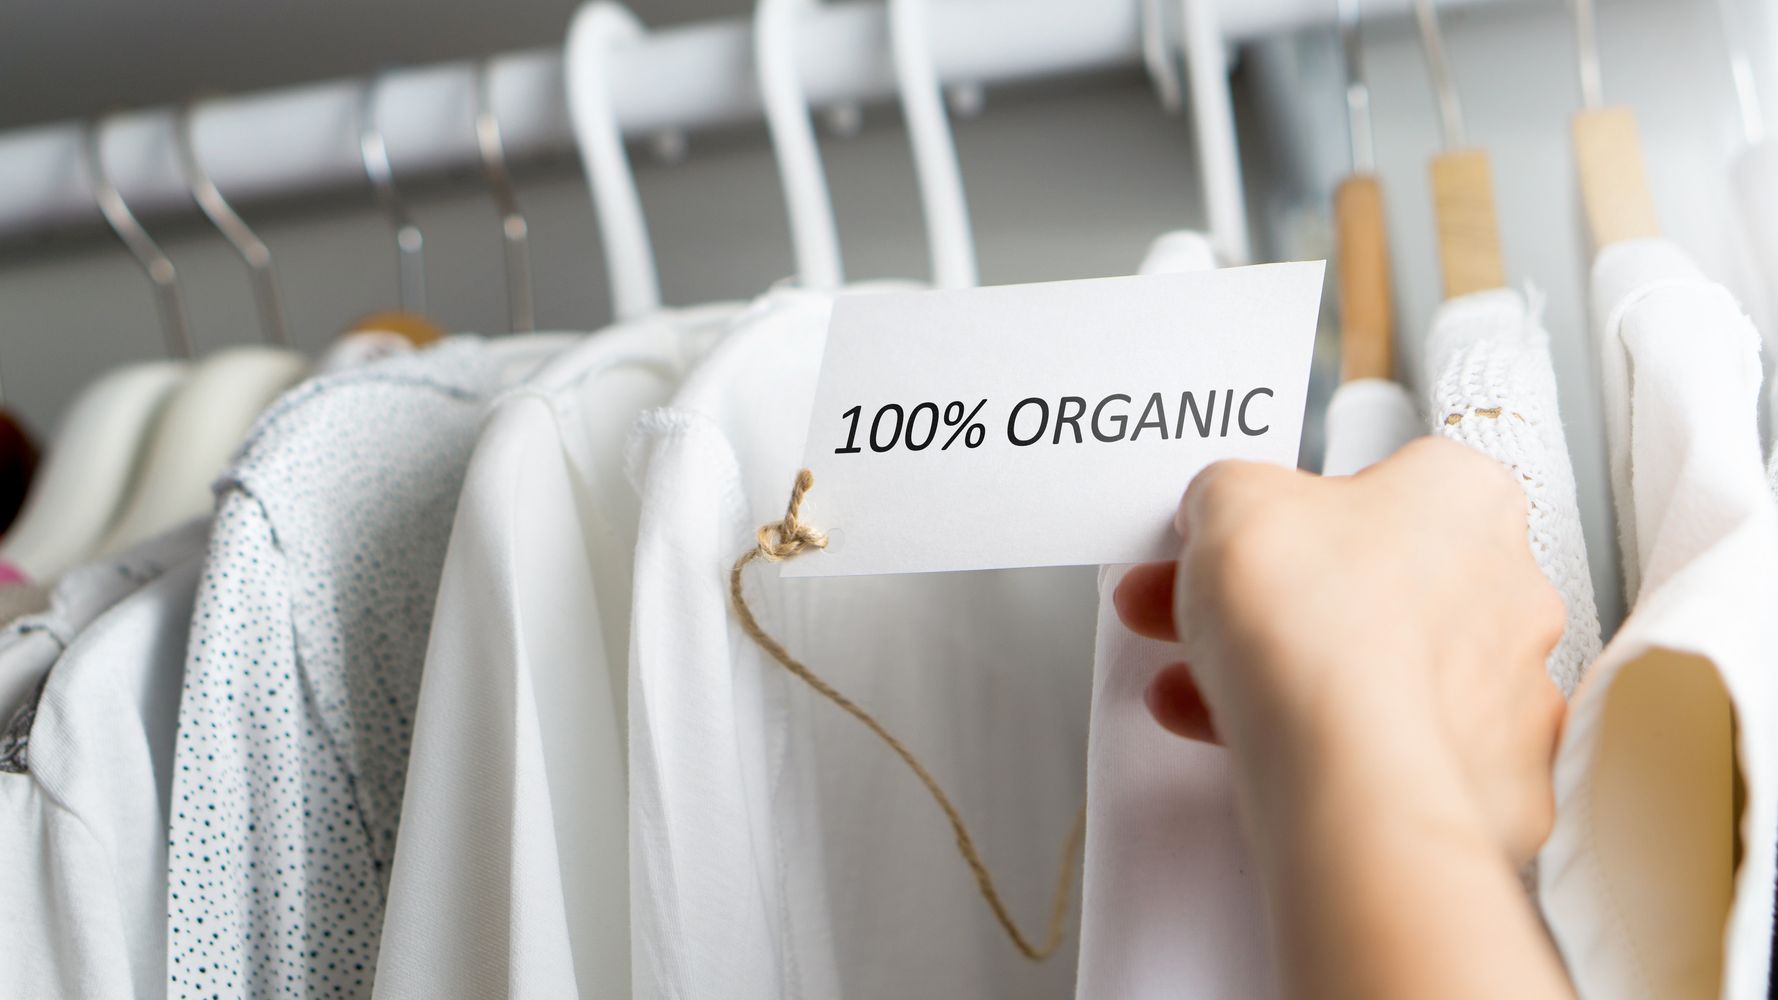 Is Free People Fast Fashion, Ethical or Sustainable?